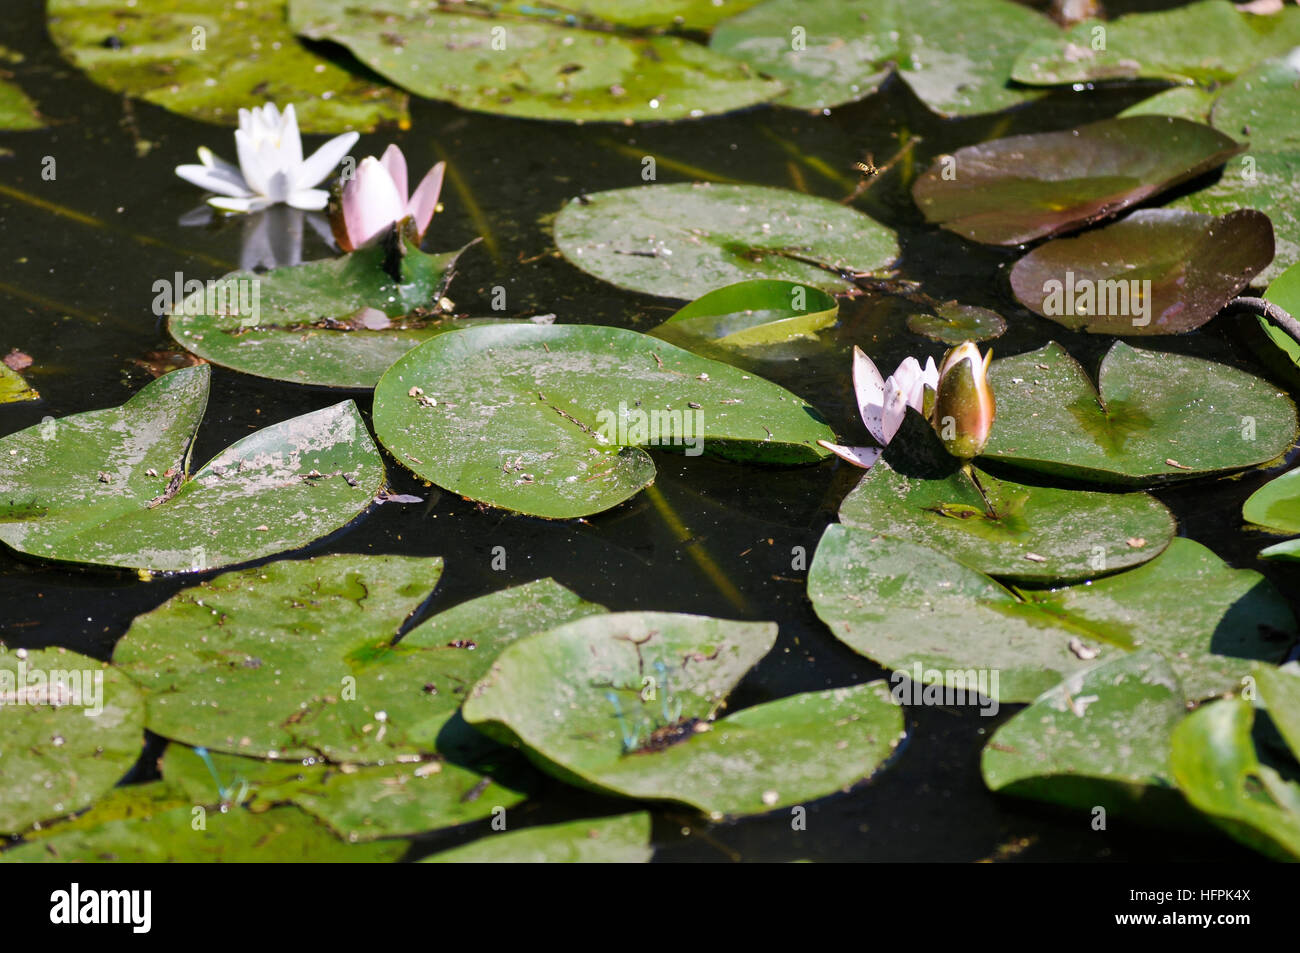 Water plants with white and pink flowers Stock Photo